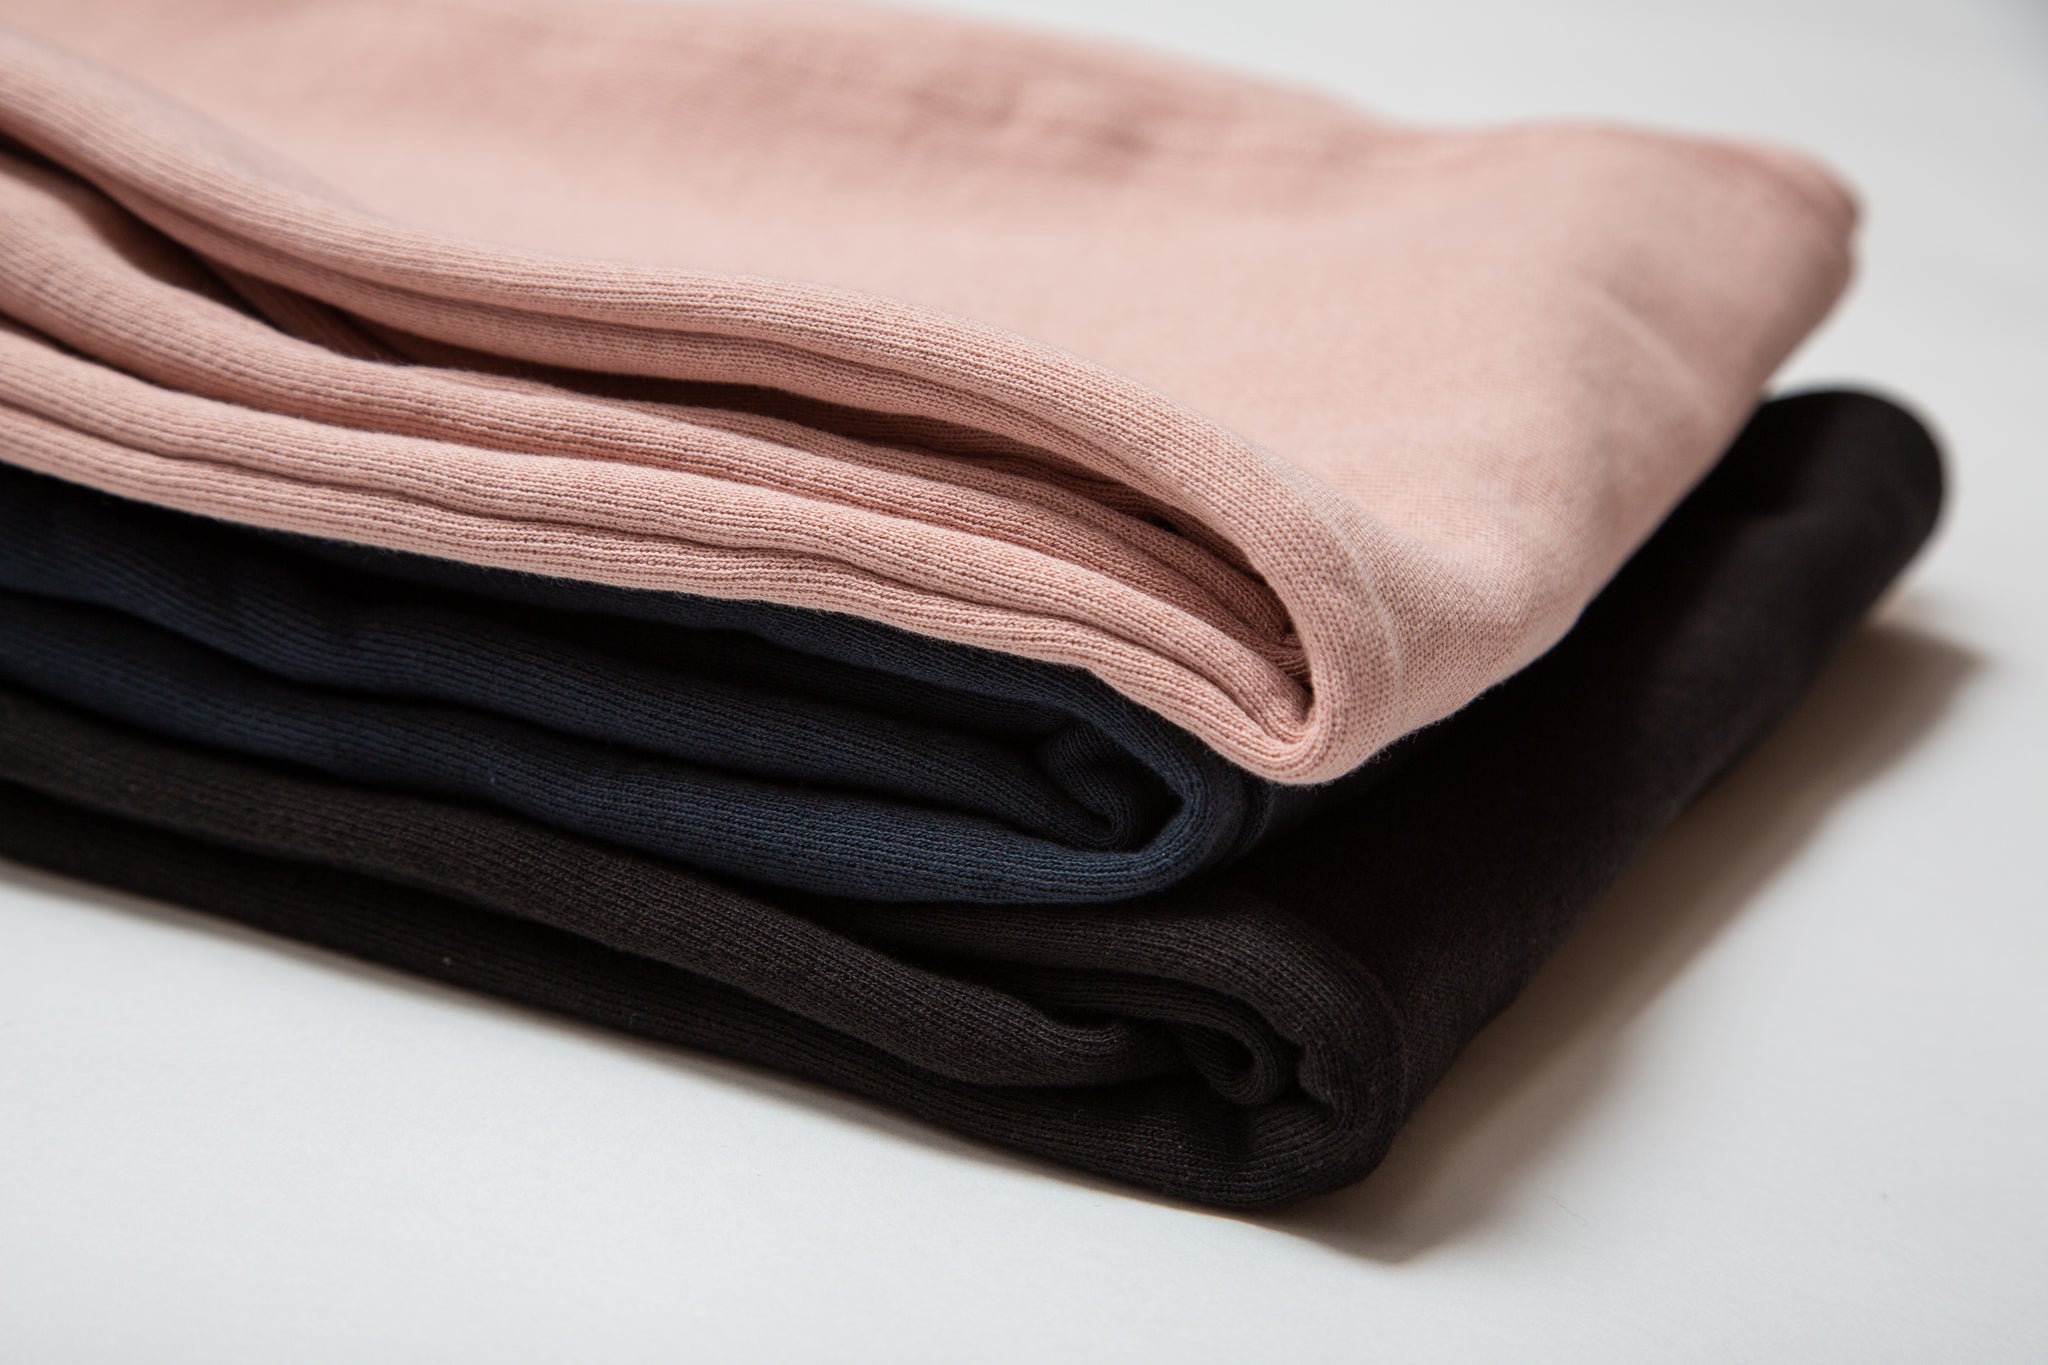 French Terry Knit Fabric: Stylish Comfort for Every Season